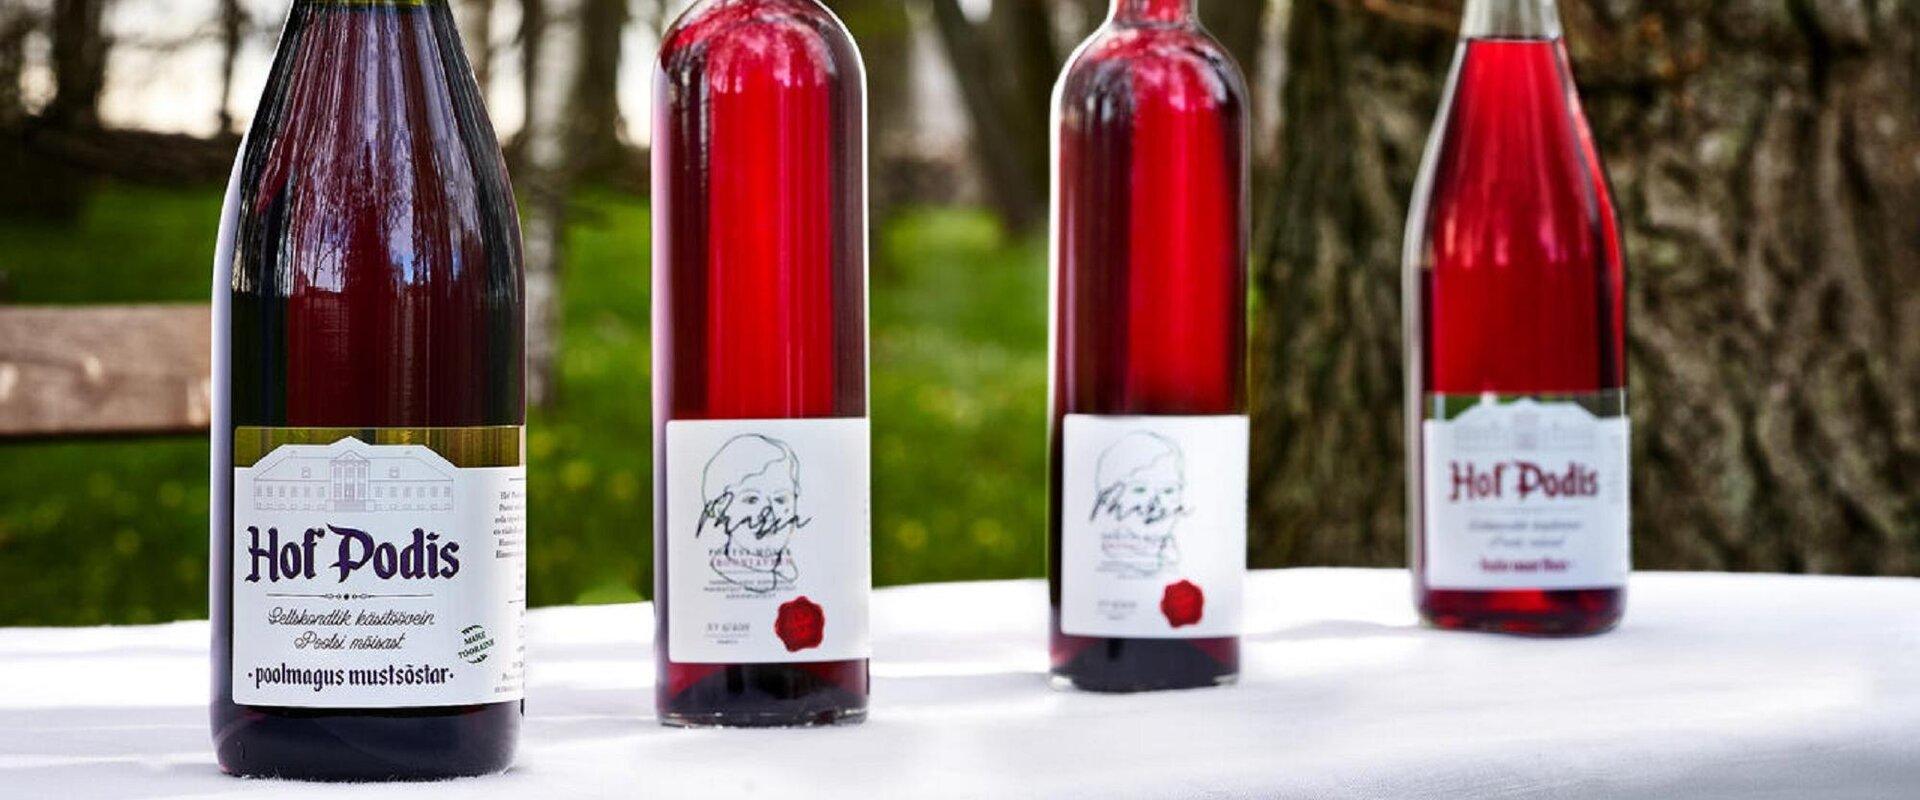 In the beautiful Pootsi Winery in Pärnu County, delicious homemade wines are made from domestic berries and cultural events are organised. We offer a 